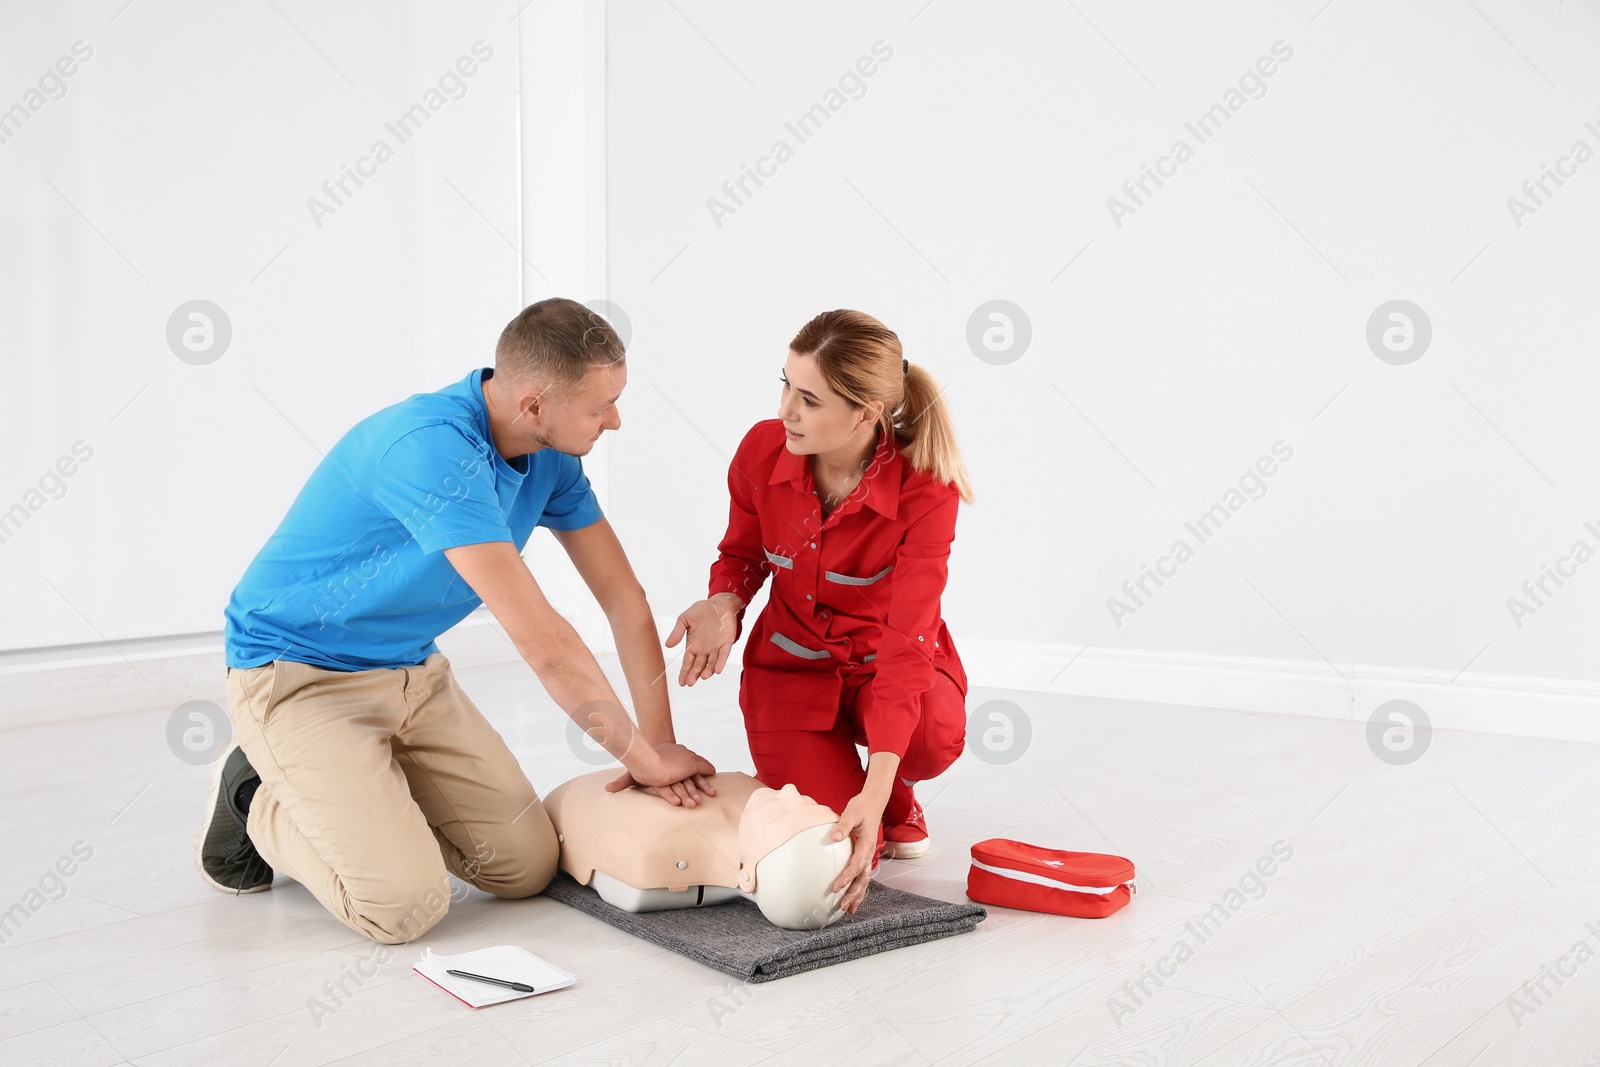 Photo of Instructor in uniform and man practicing first aid on mannequin indoors